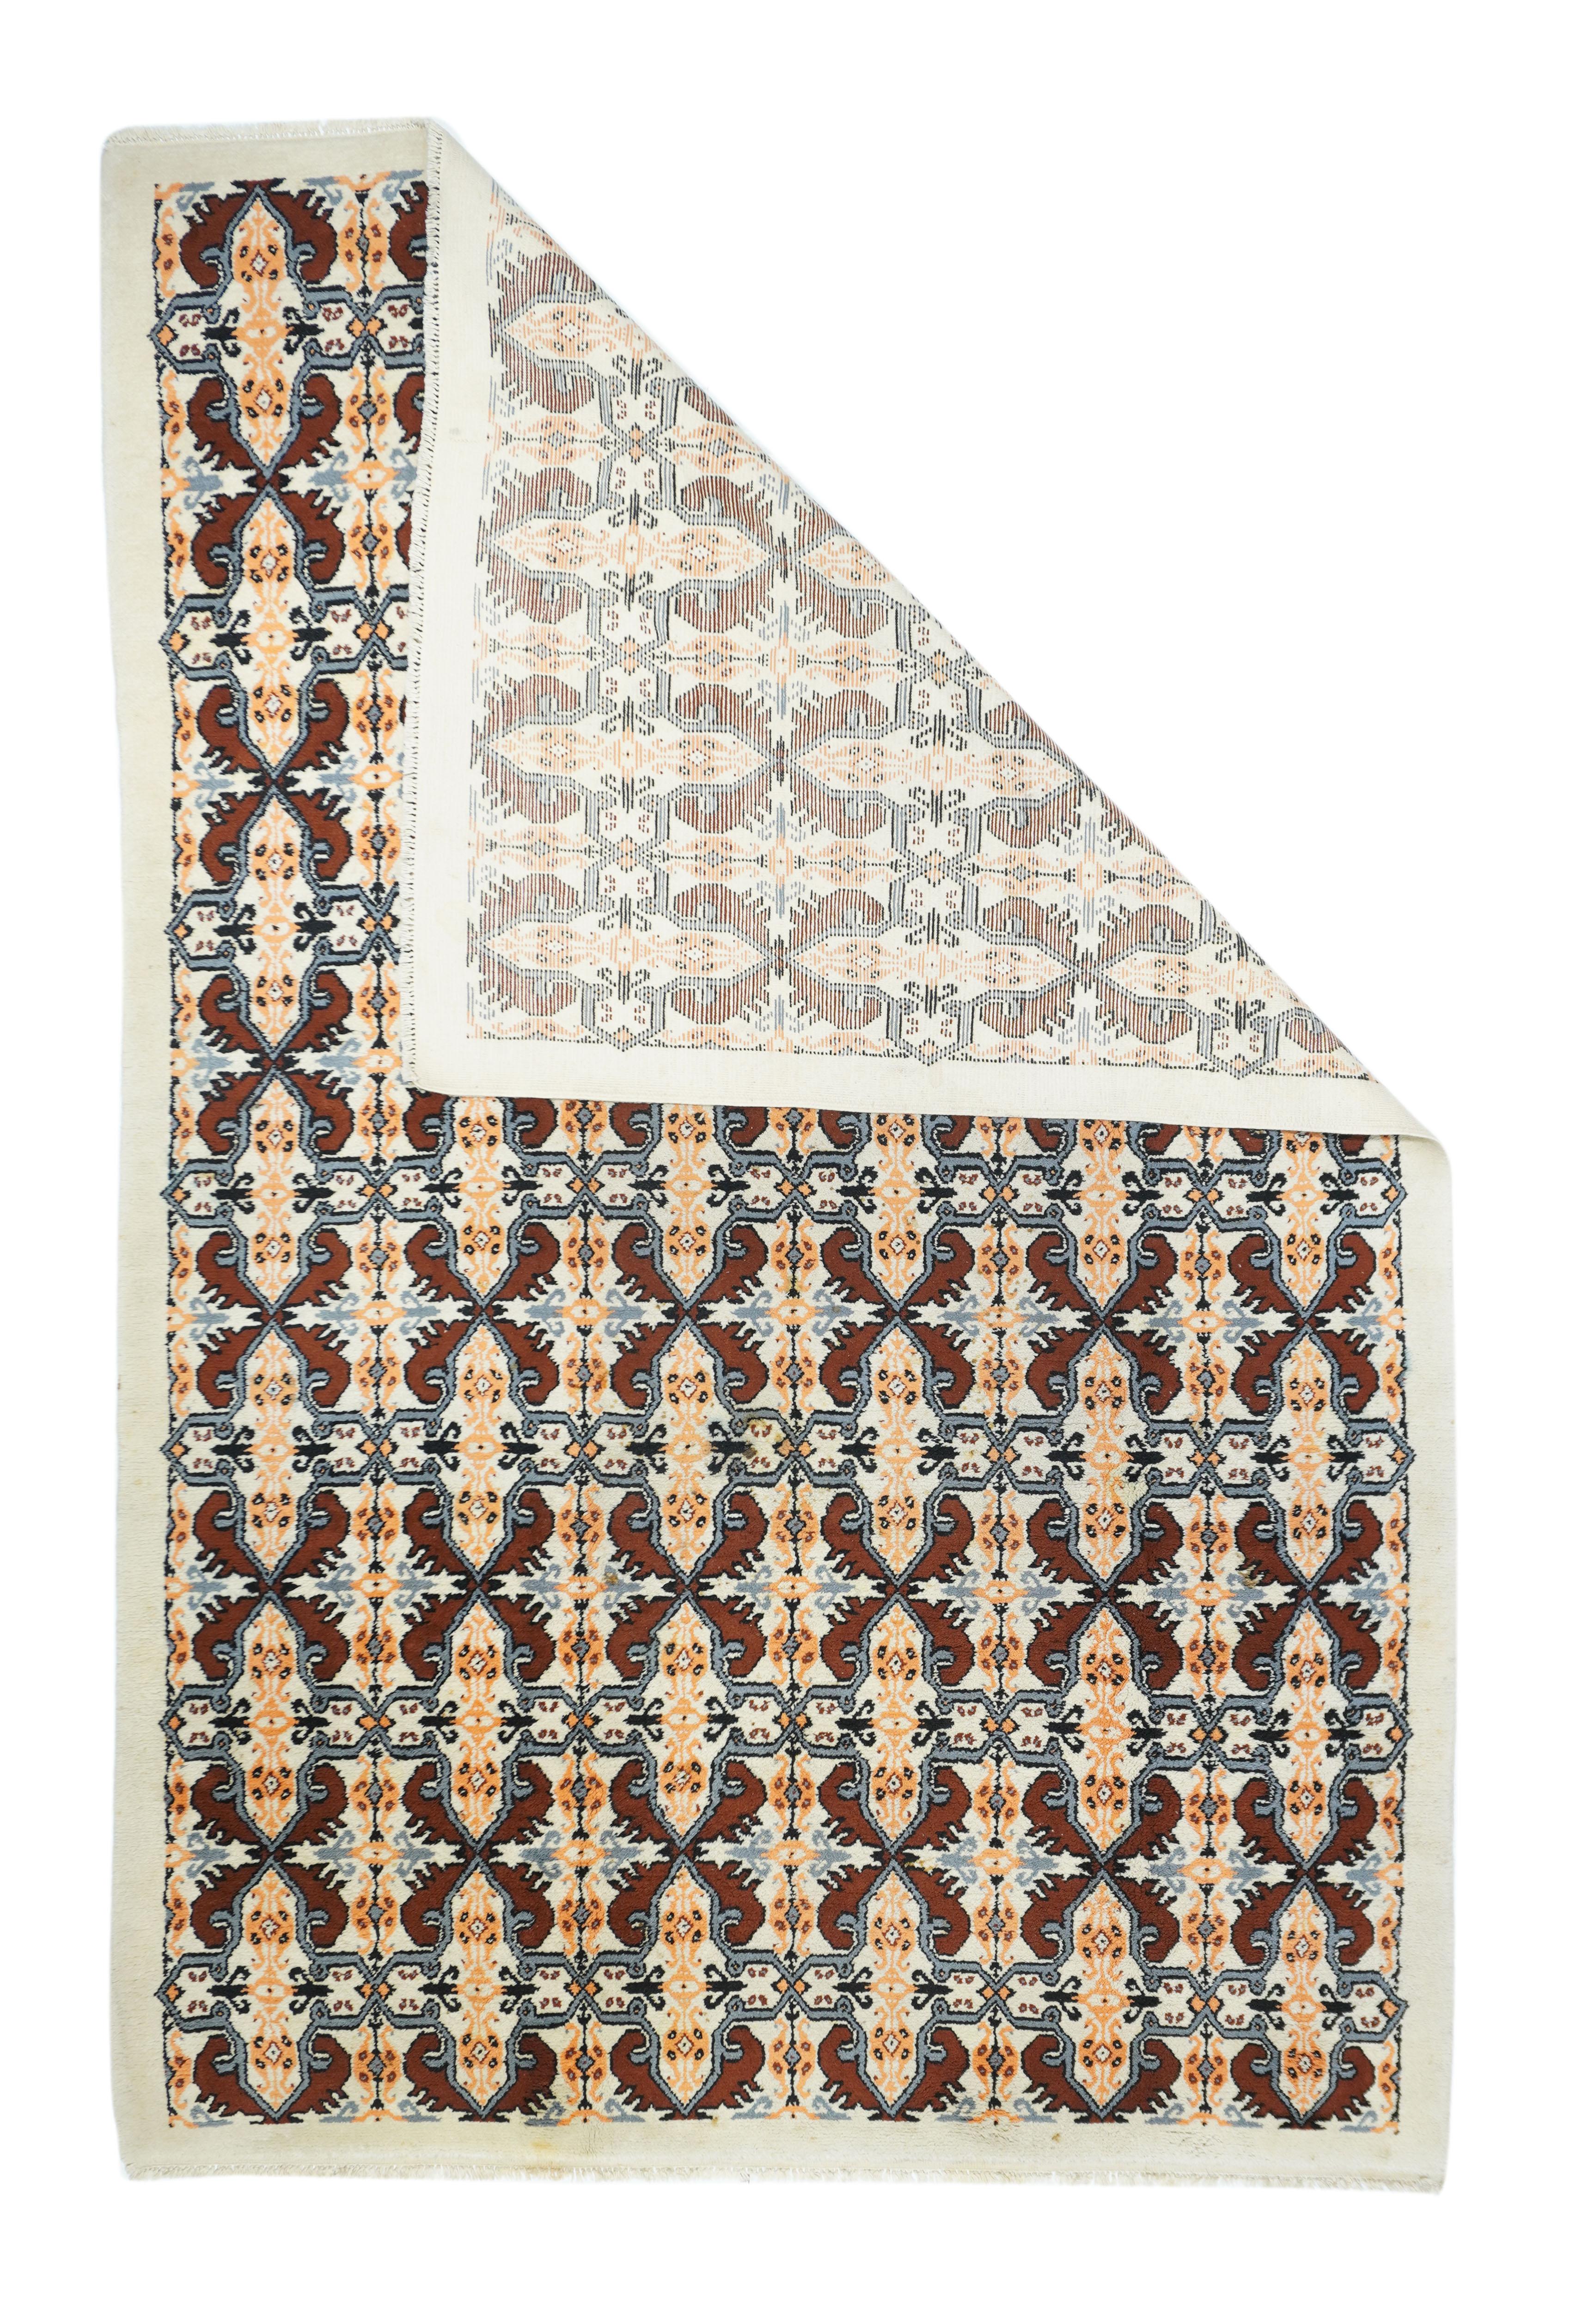 Vintage Moroccan rug 6'4'' x 10'. The sand ground shows an allover interlocking tile pattern of rounded octogrames and crosses. Red, green and khaki accents. Self-colored plain border. For a version, also with six column pattern and a rust-red